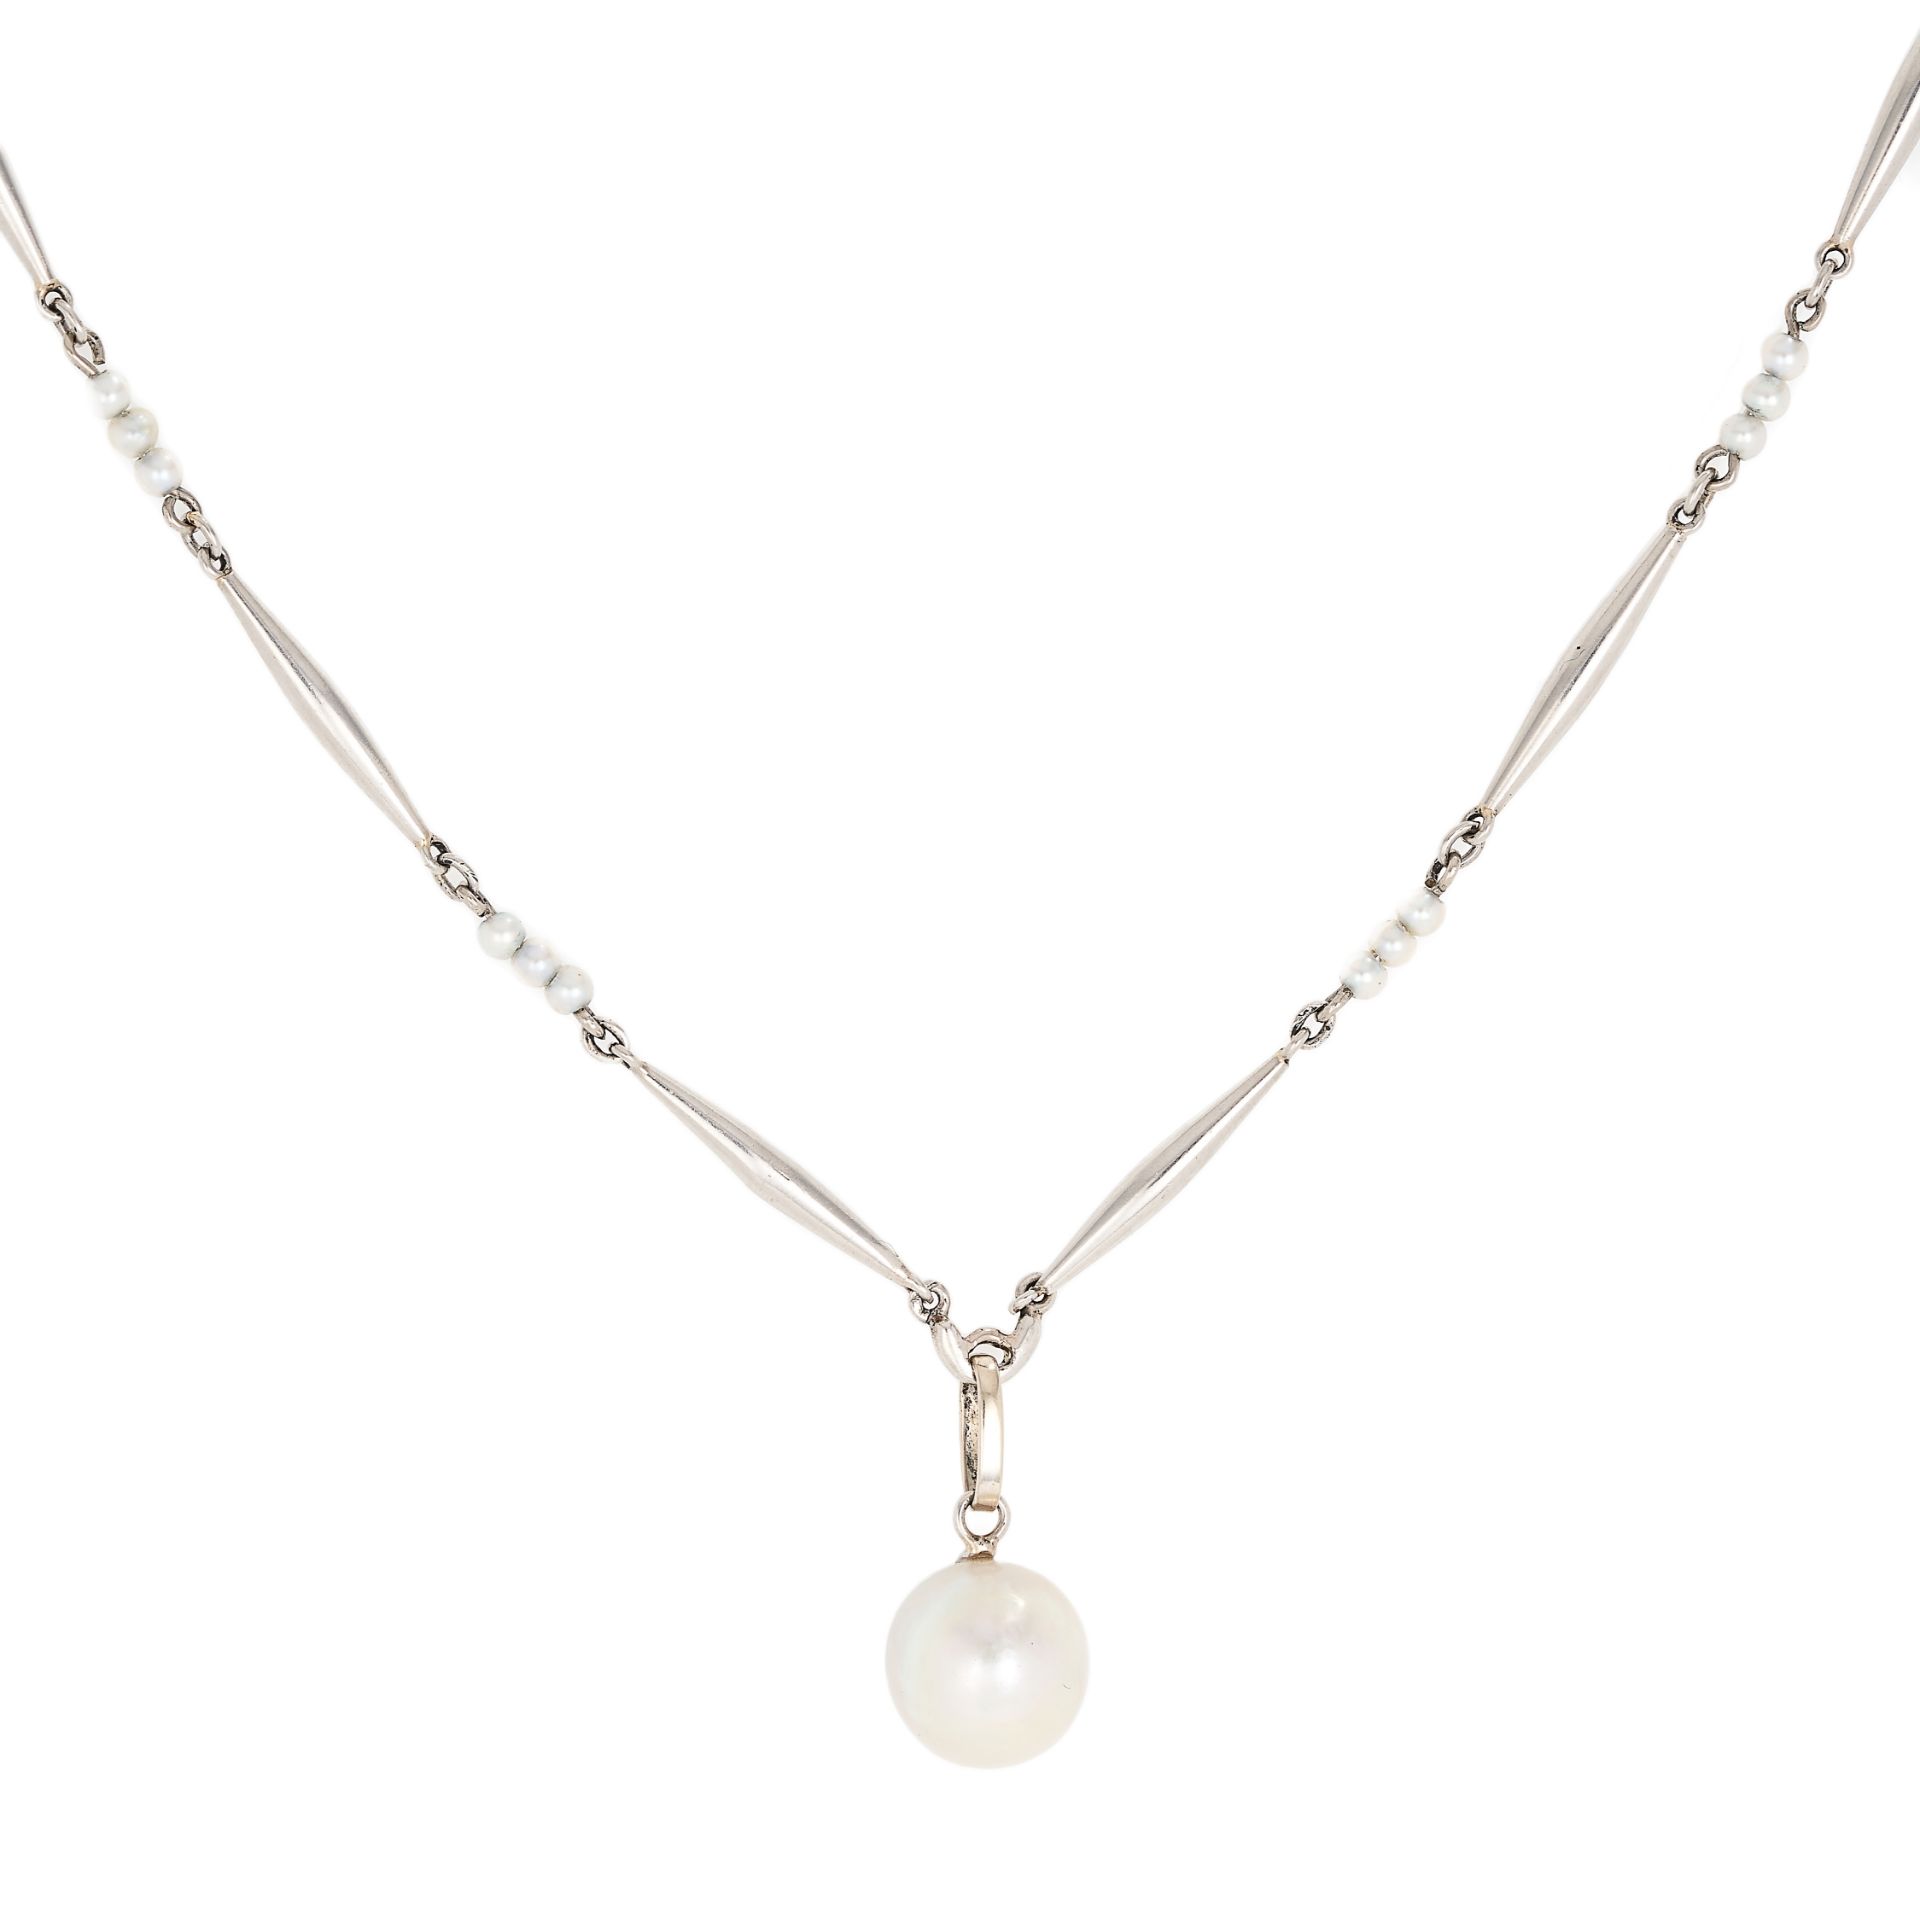 AN ANTIQUE PEARL PENDANT NECKLACE in platinum, set with a pearl of 8.5mm in diameter suspended